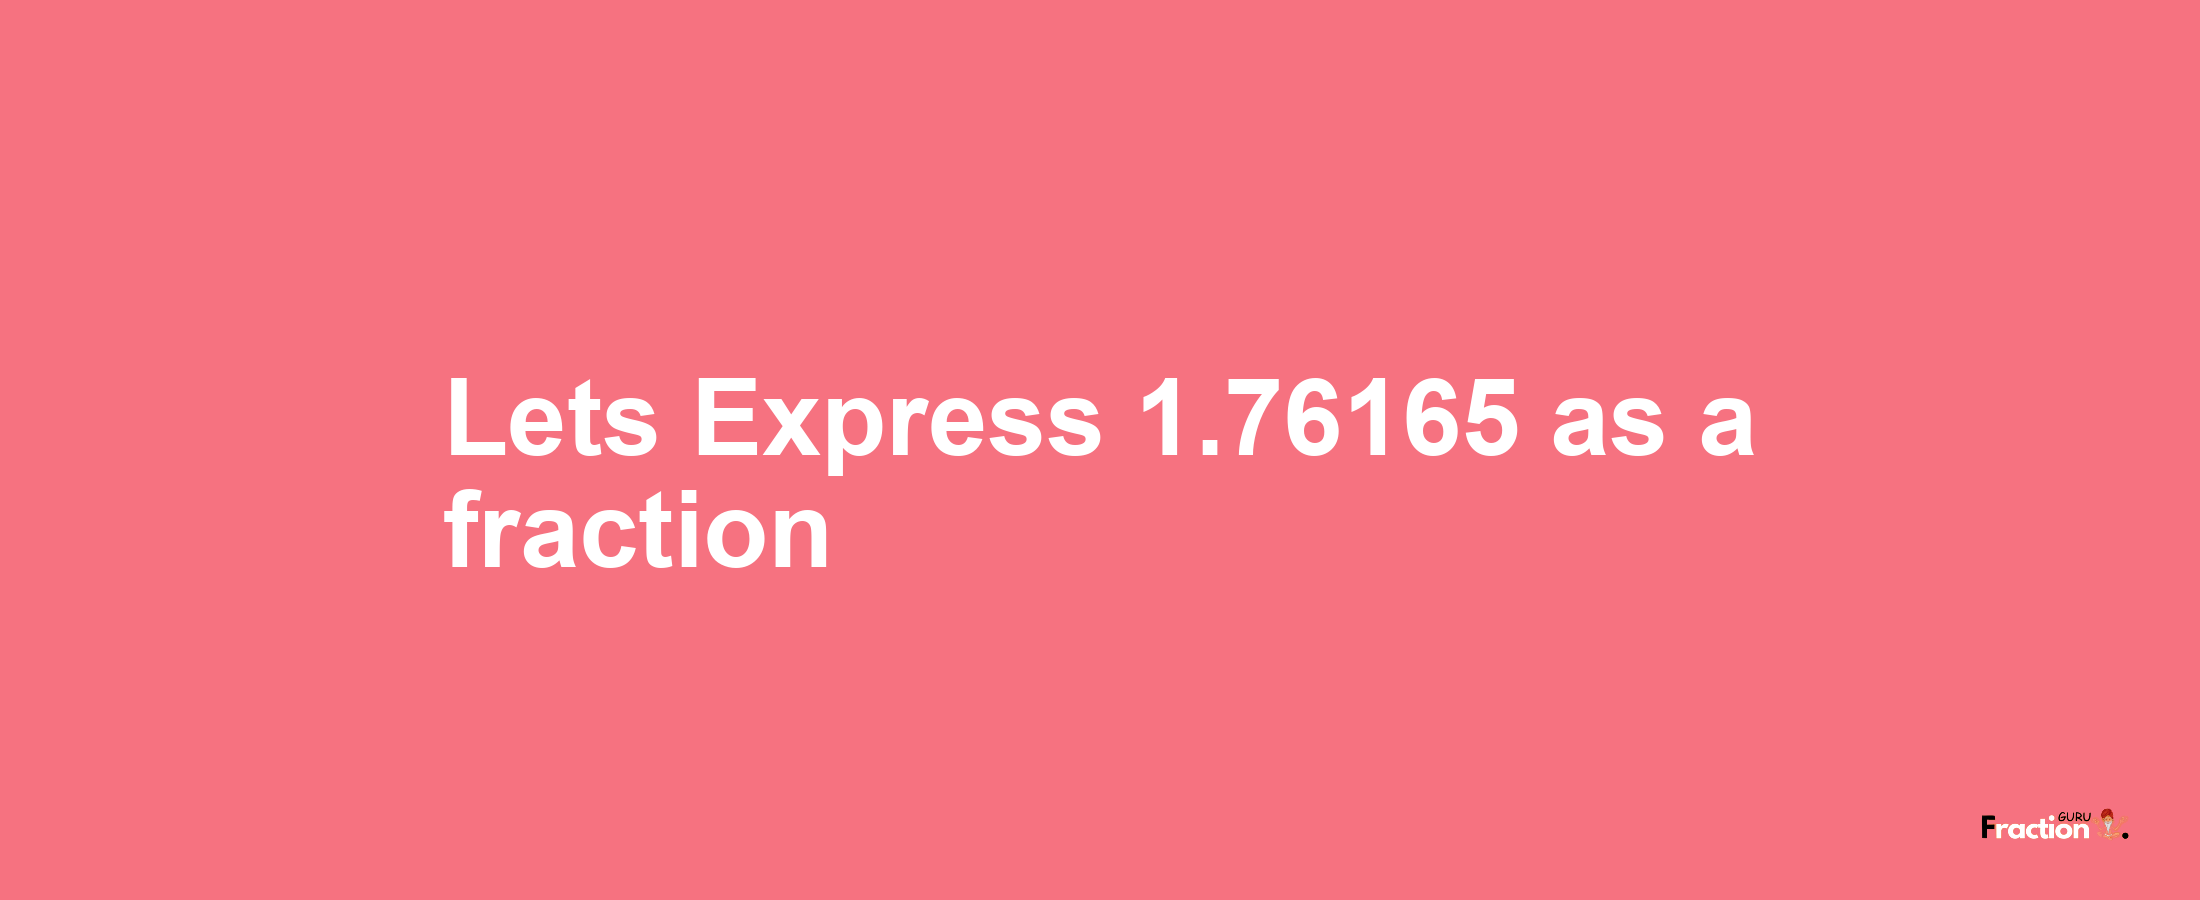 Lets Express 1.76165 as afraction